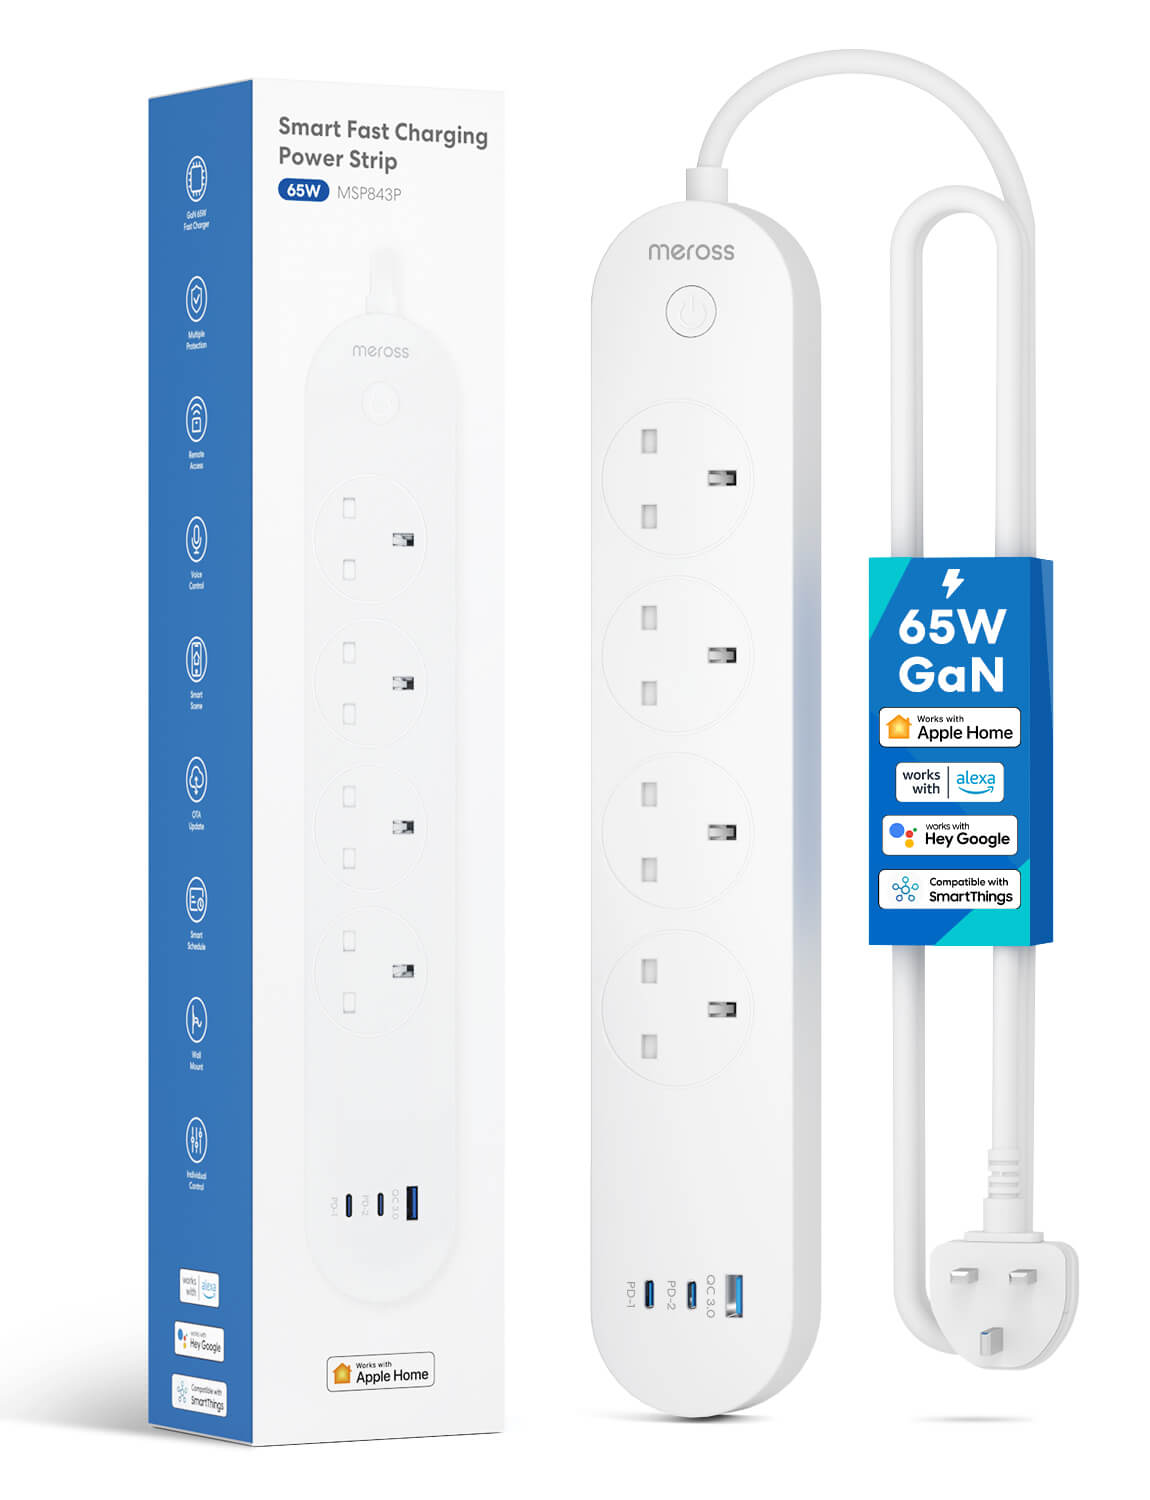 Meross Smart Power Strip Compatible with Apple HomeKit, Siri, Alexa, Google Home and SmartThings, WiFi Surge Protector with 4 AC Outlets, 4 USB